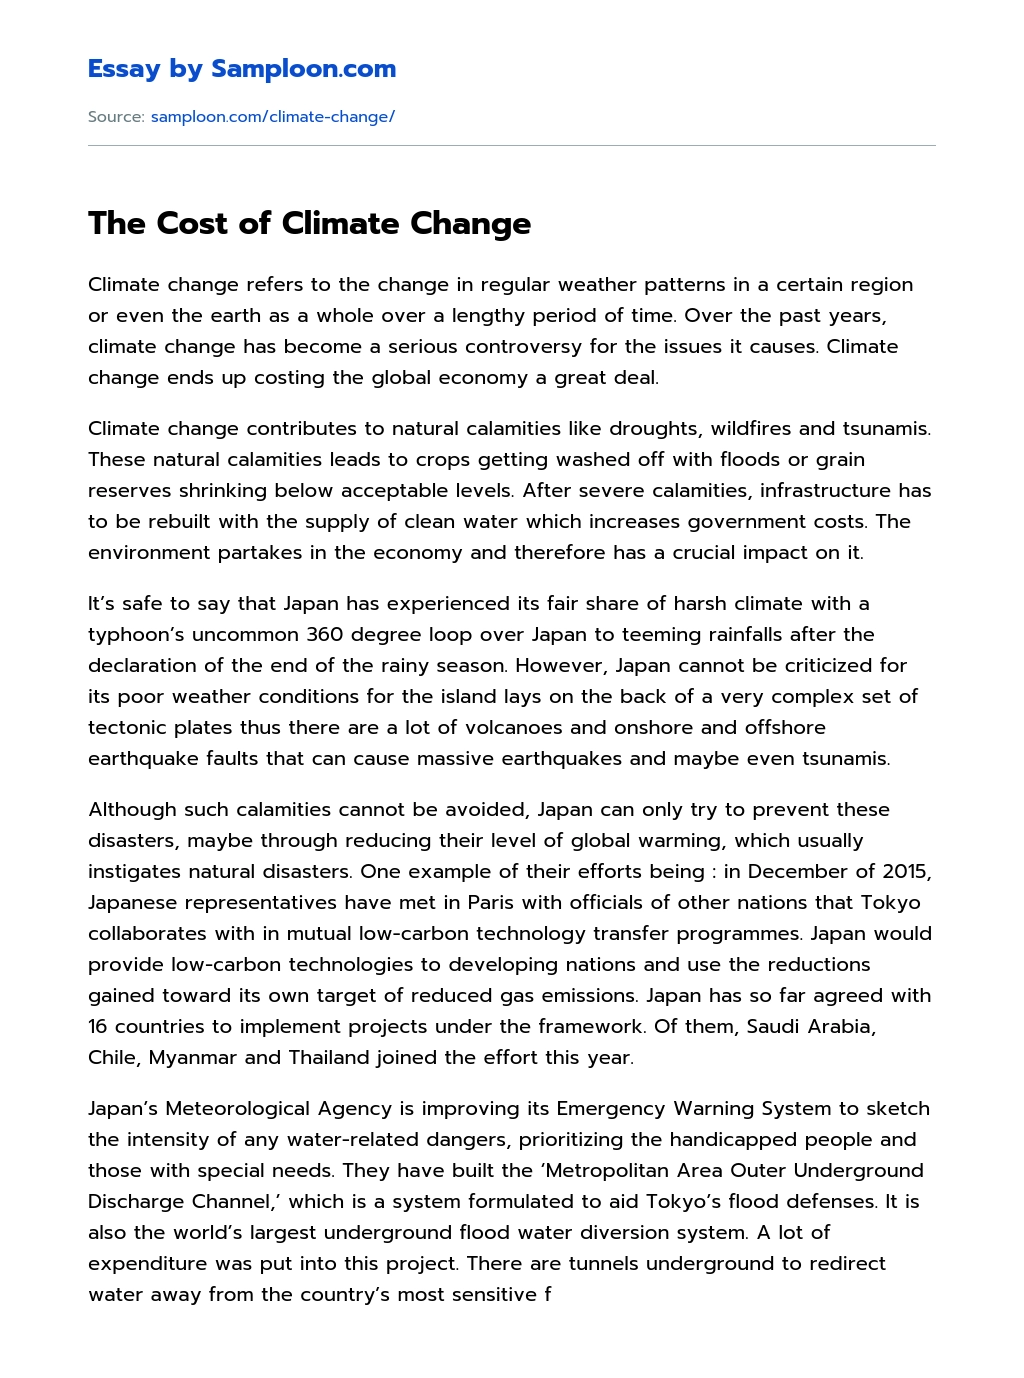 The Cost of Climate Change essay